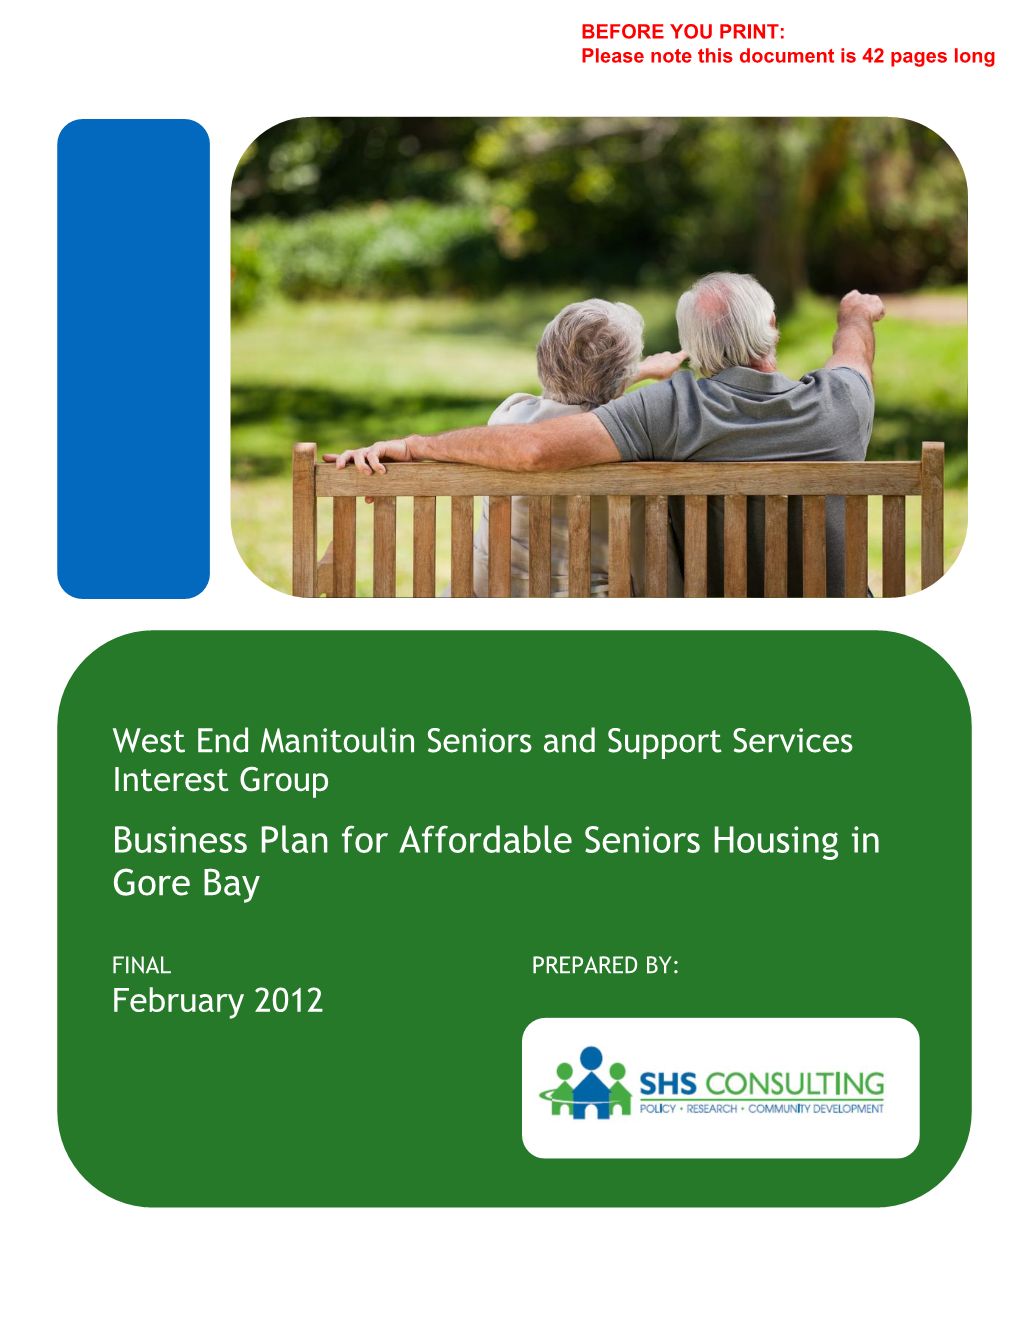 Business Plan for Affordable Seniors Housing in Gore